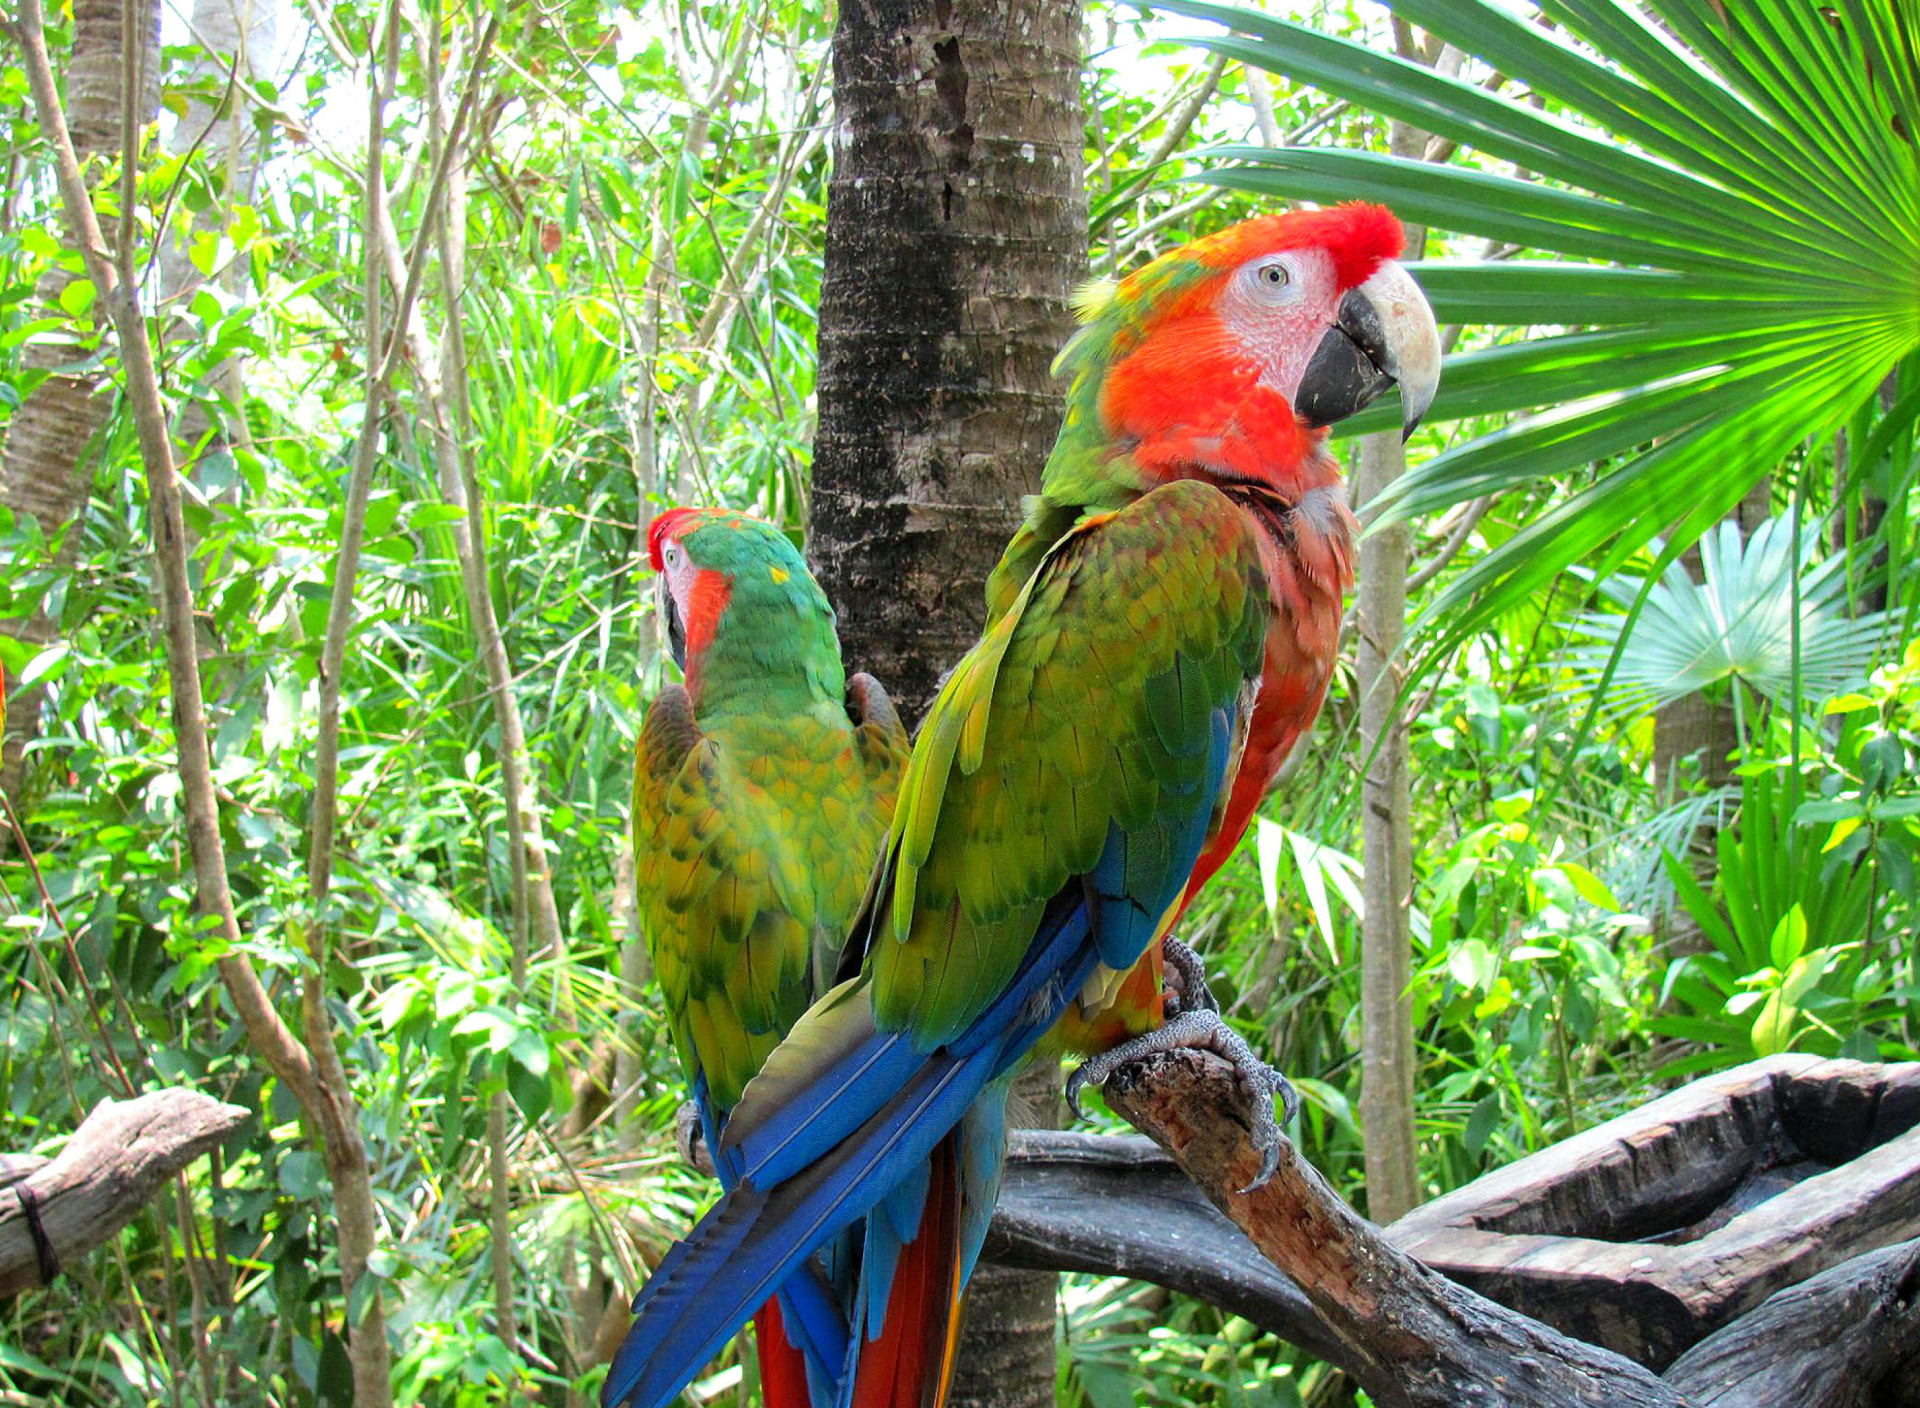 Macaw parrot Amazon forest screenshot #1 1920x1408